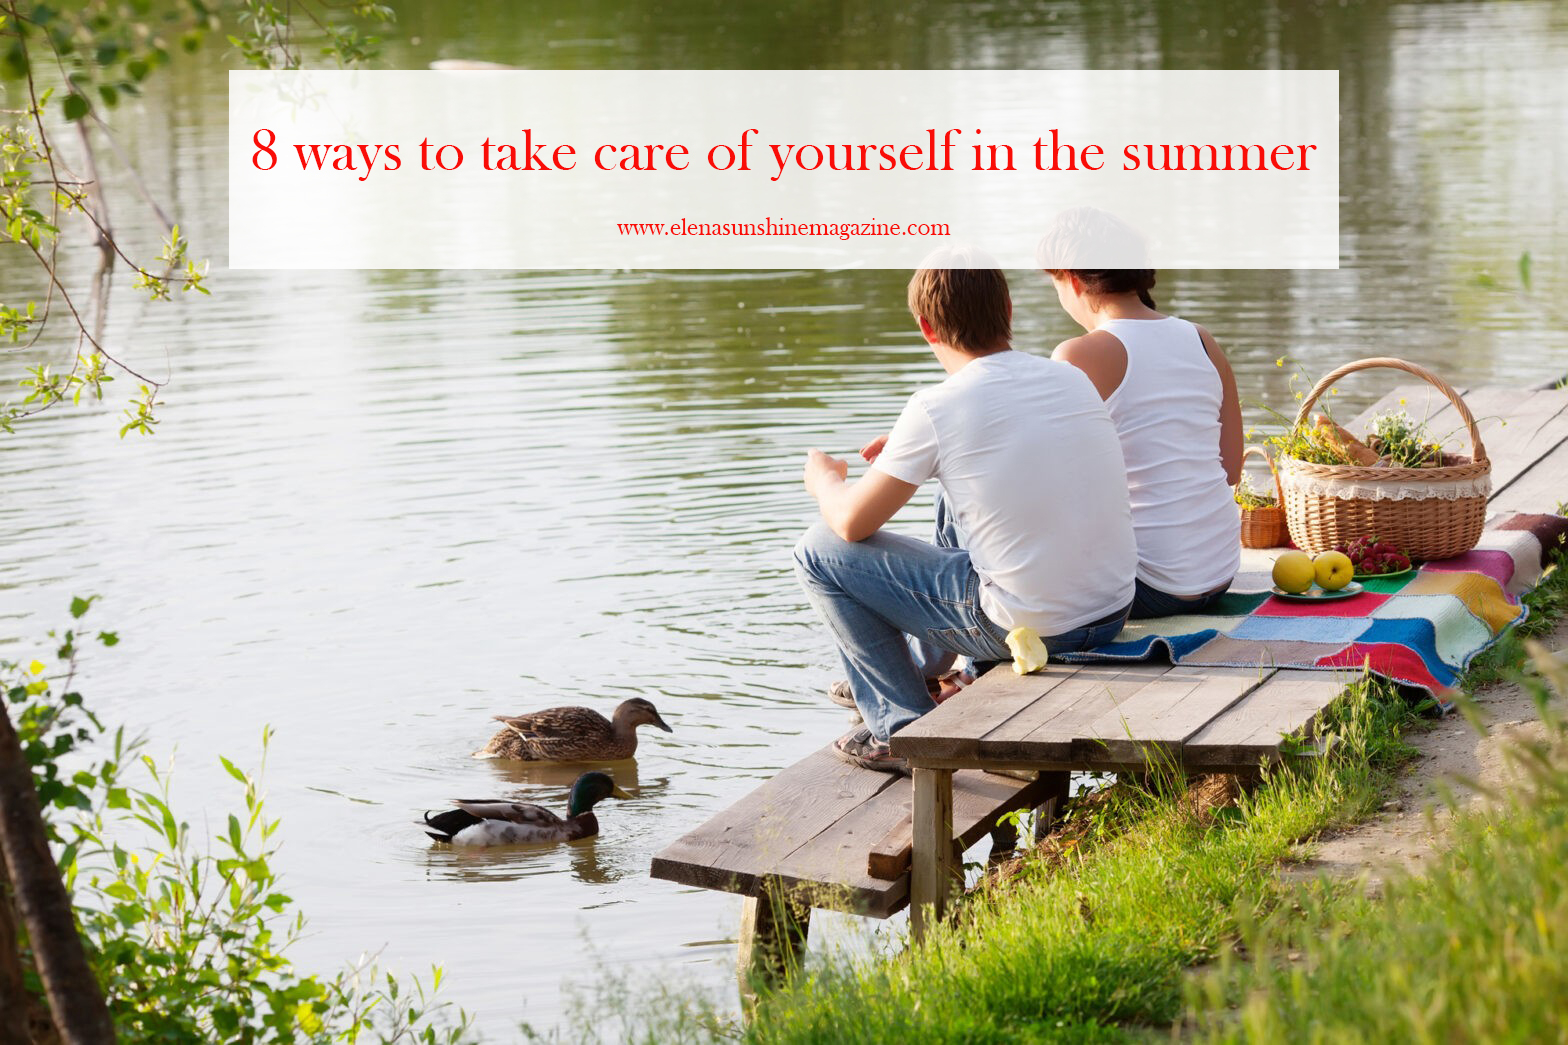 8 ways to take care of yourself in the summer